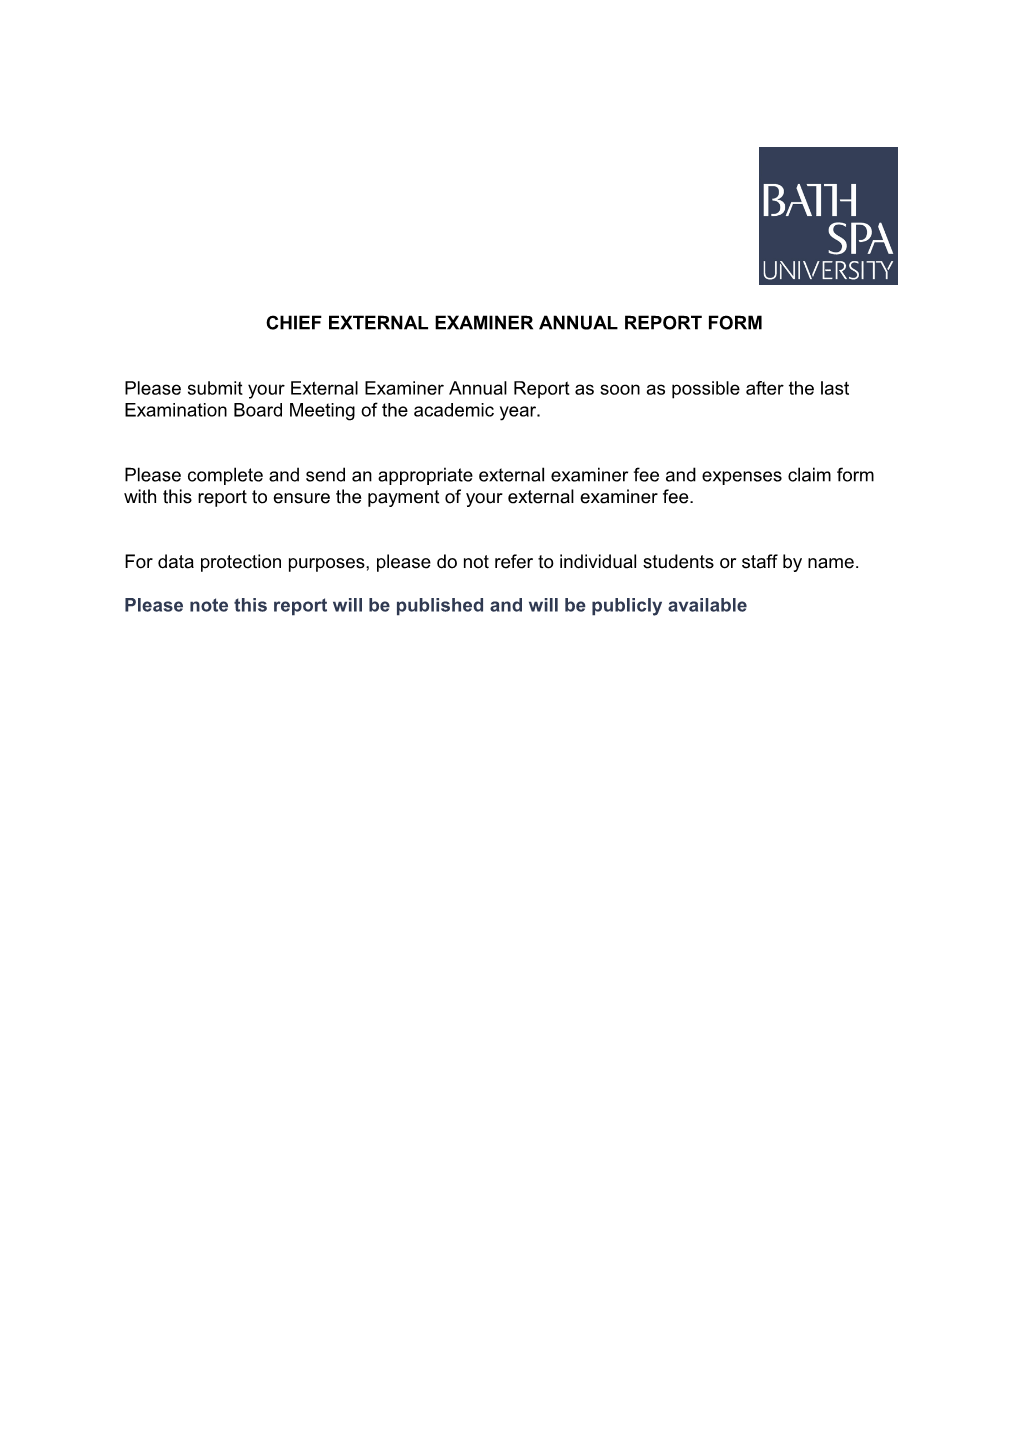 Chief External Examiner Annual Report Form